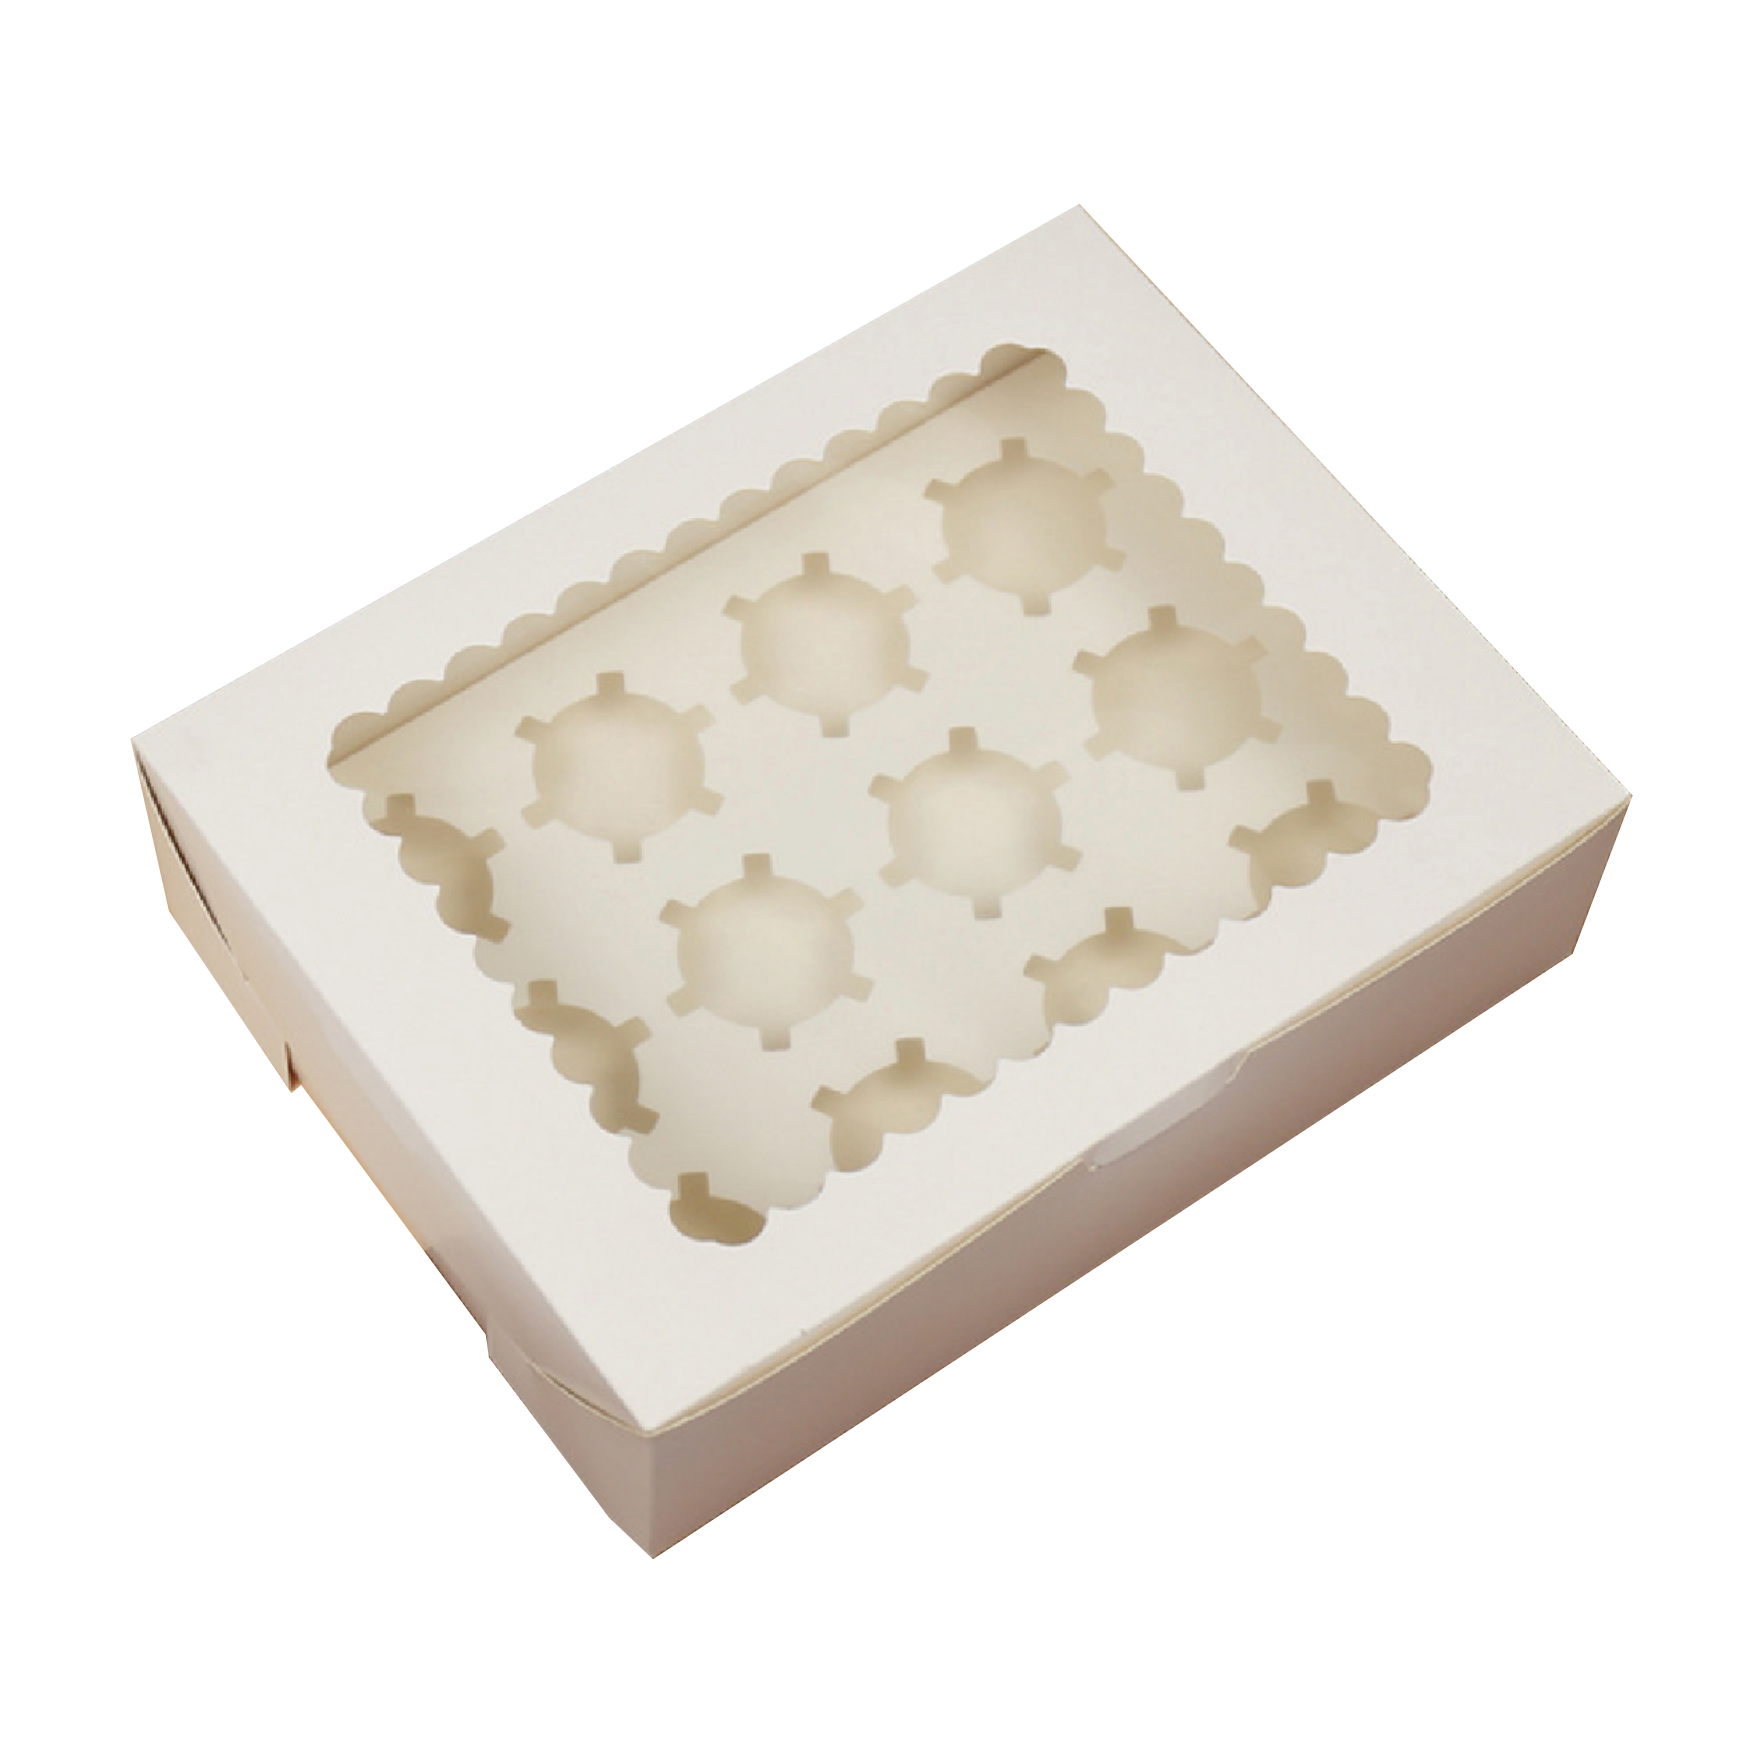 12 Cupcake Box with Removable Insert - White